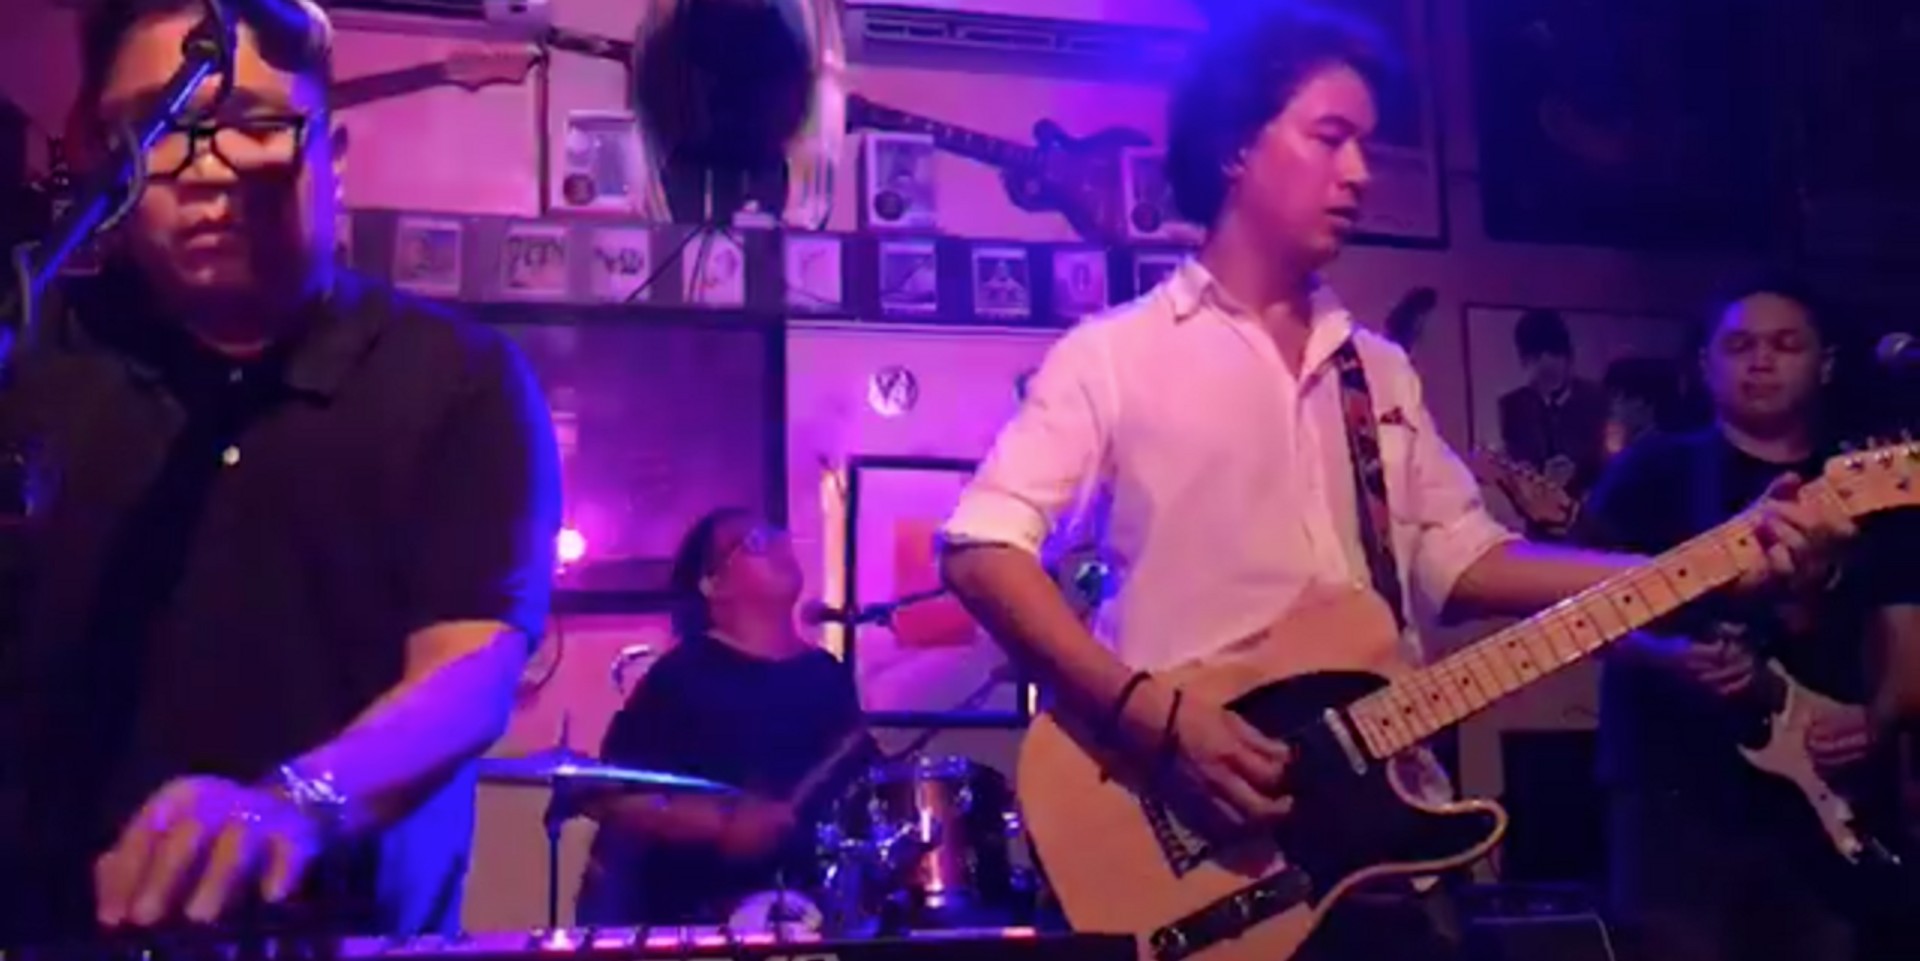 Watch Ely Buendia and The Itchyworms perform each other's songs